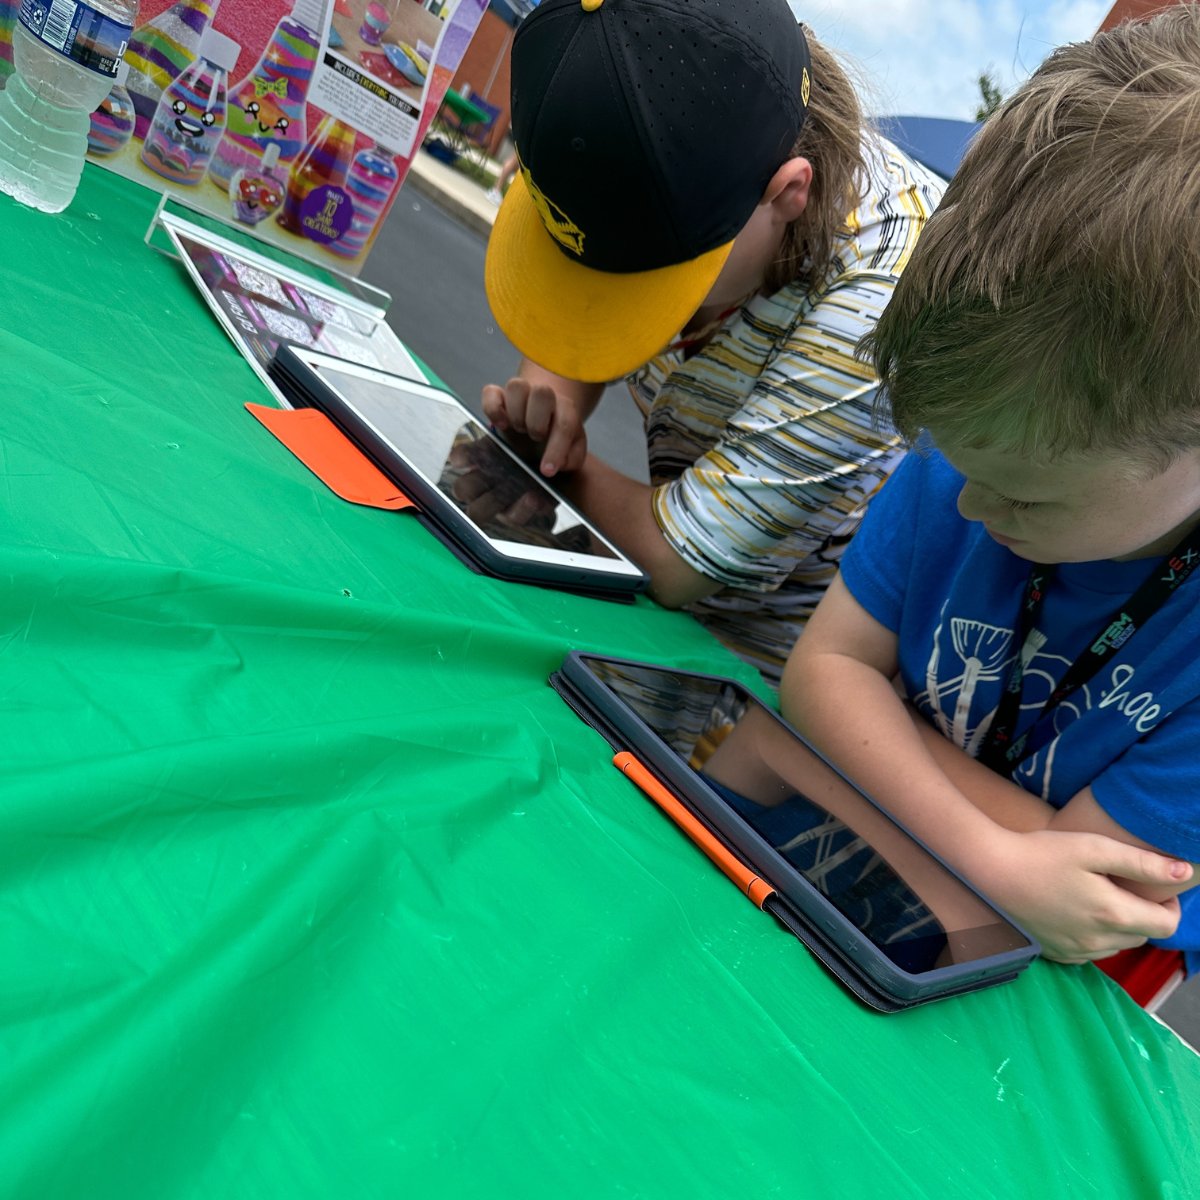 Our Innovation Instructors had an awesome day diving into the realms of coding, robotics, and everything STEM with students at the Henry County STEM Fest! Thank you to all who joined us in shaping a future where innovation thrives! #CultivateChange #STEM #STEMFest #EdFarm